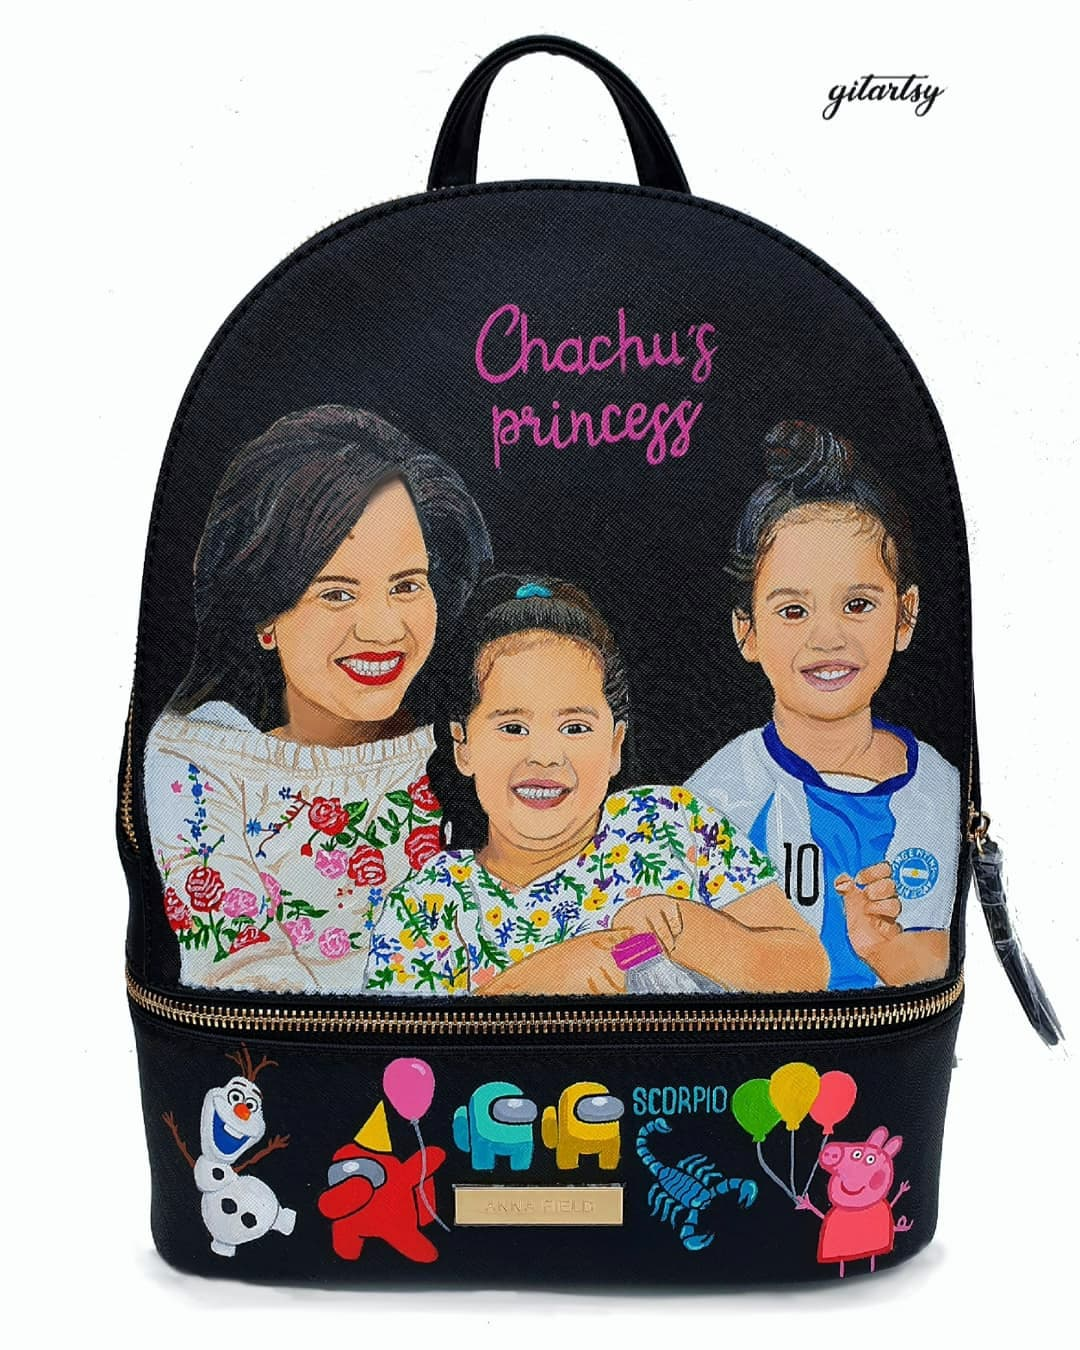 Hand painted backpack with family portraits - mum and children 